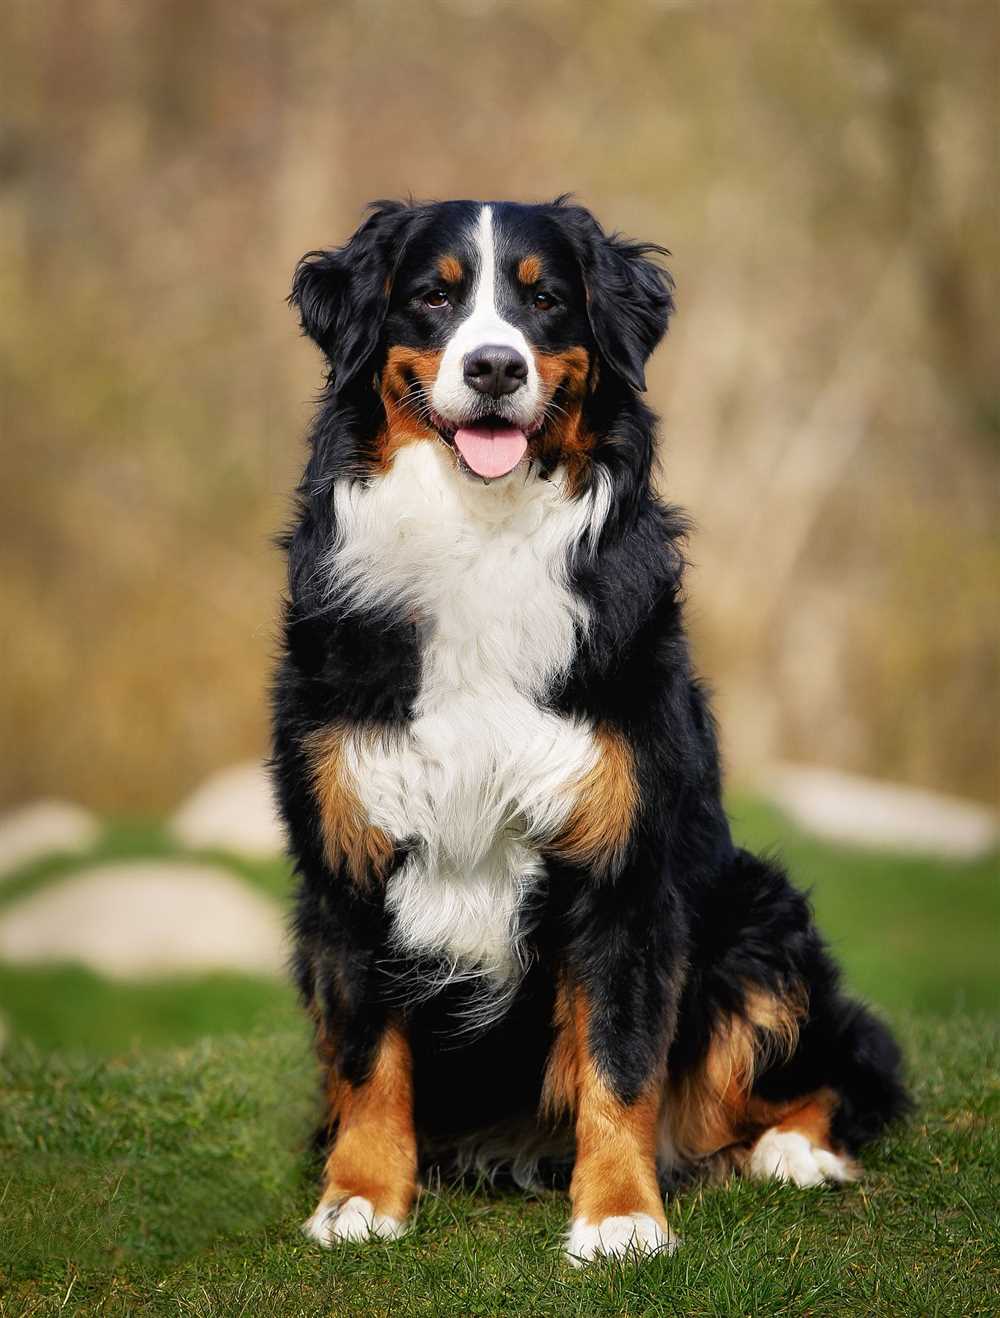 The Top 10 Dog Breeds for Families: Choosing the Perfect Companion